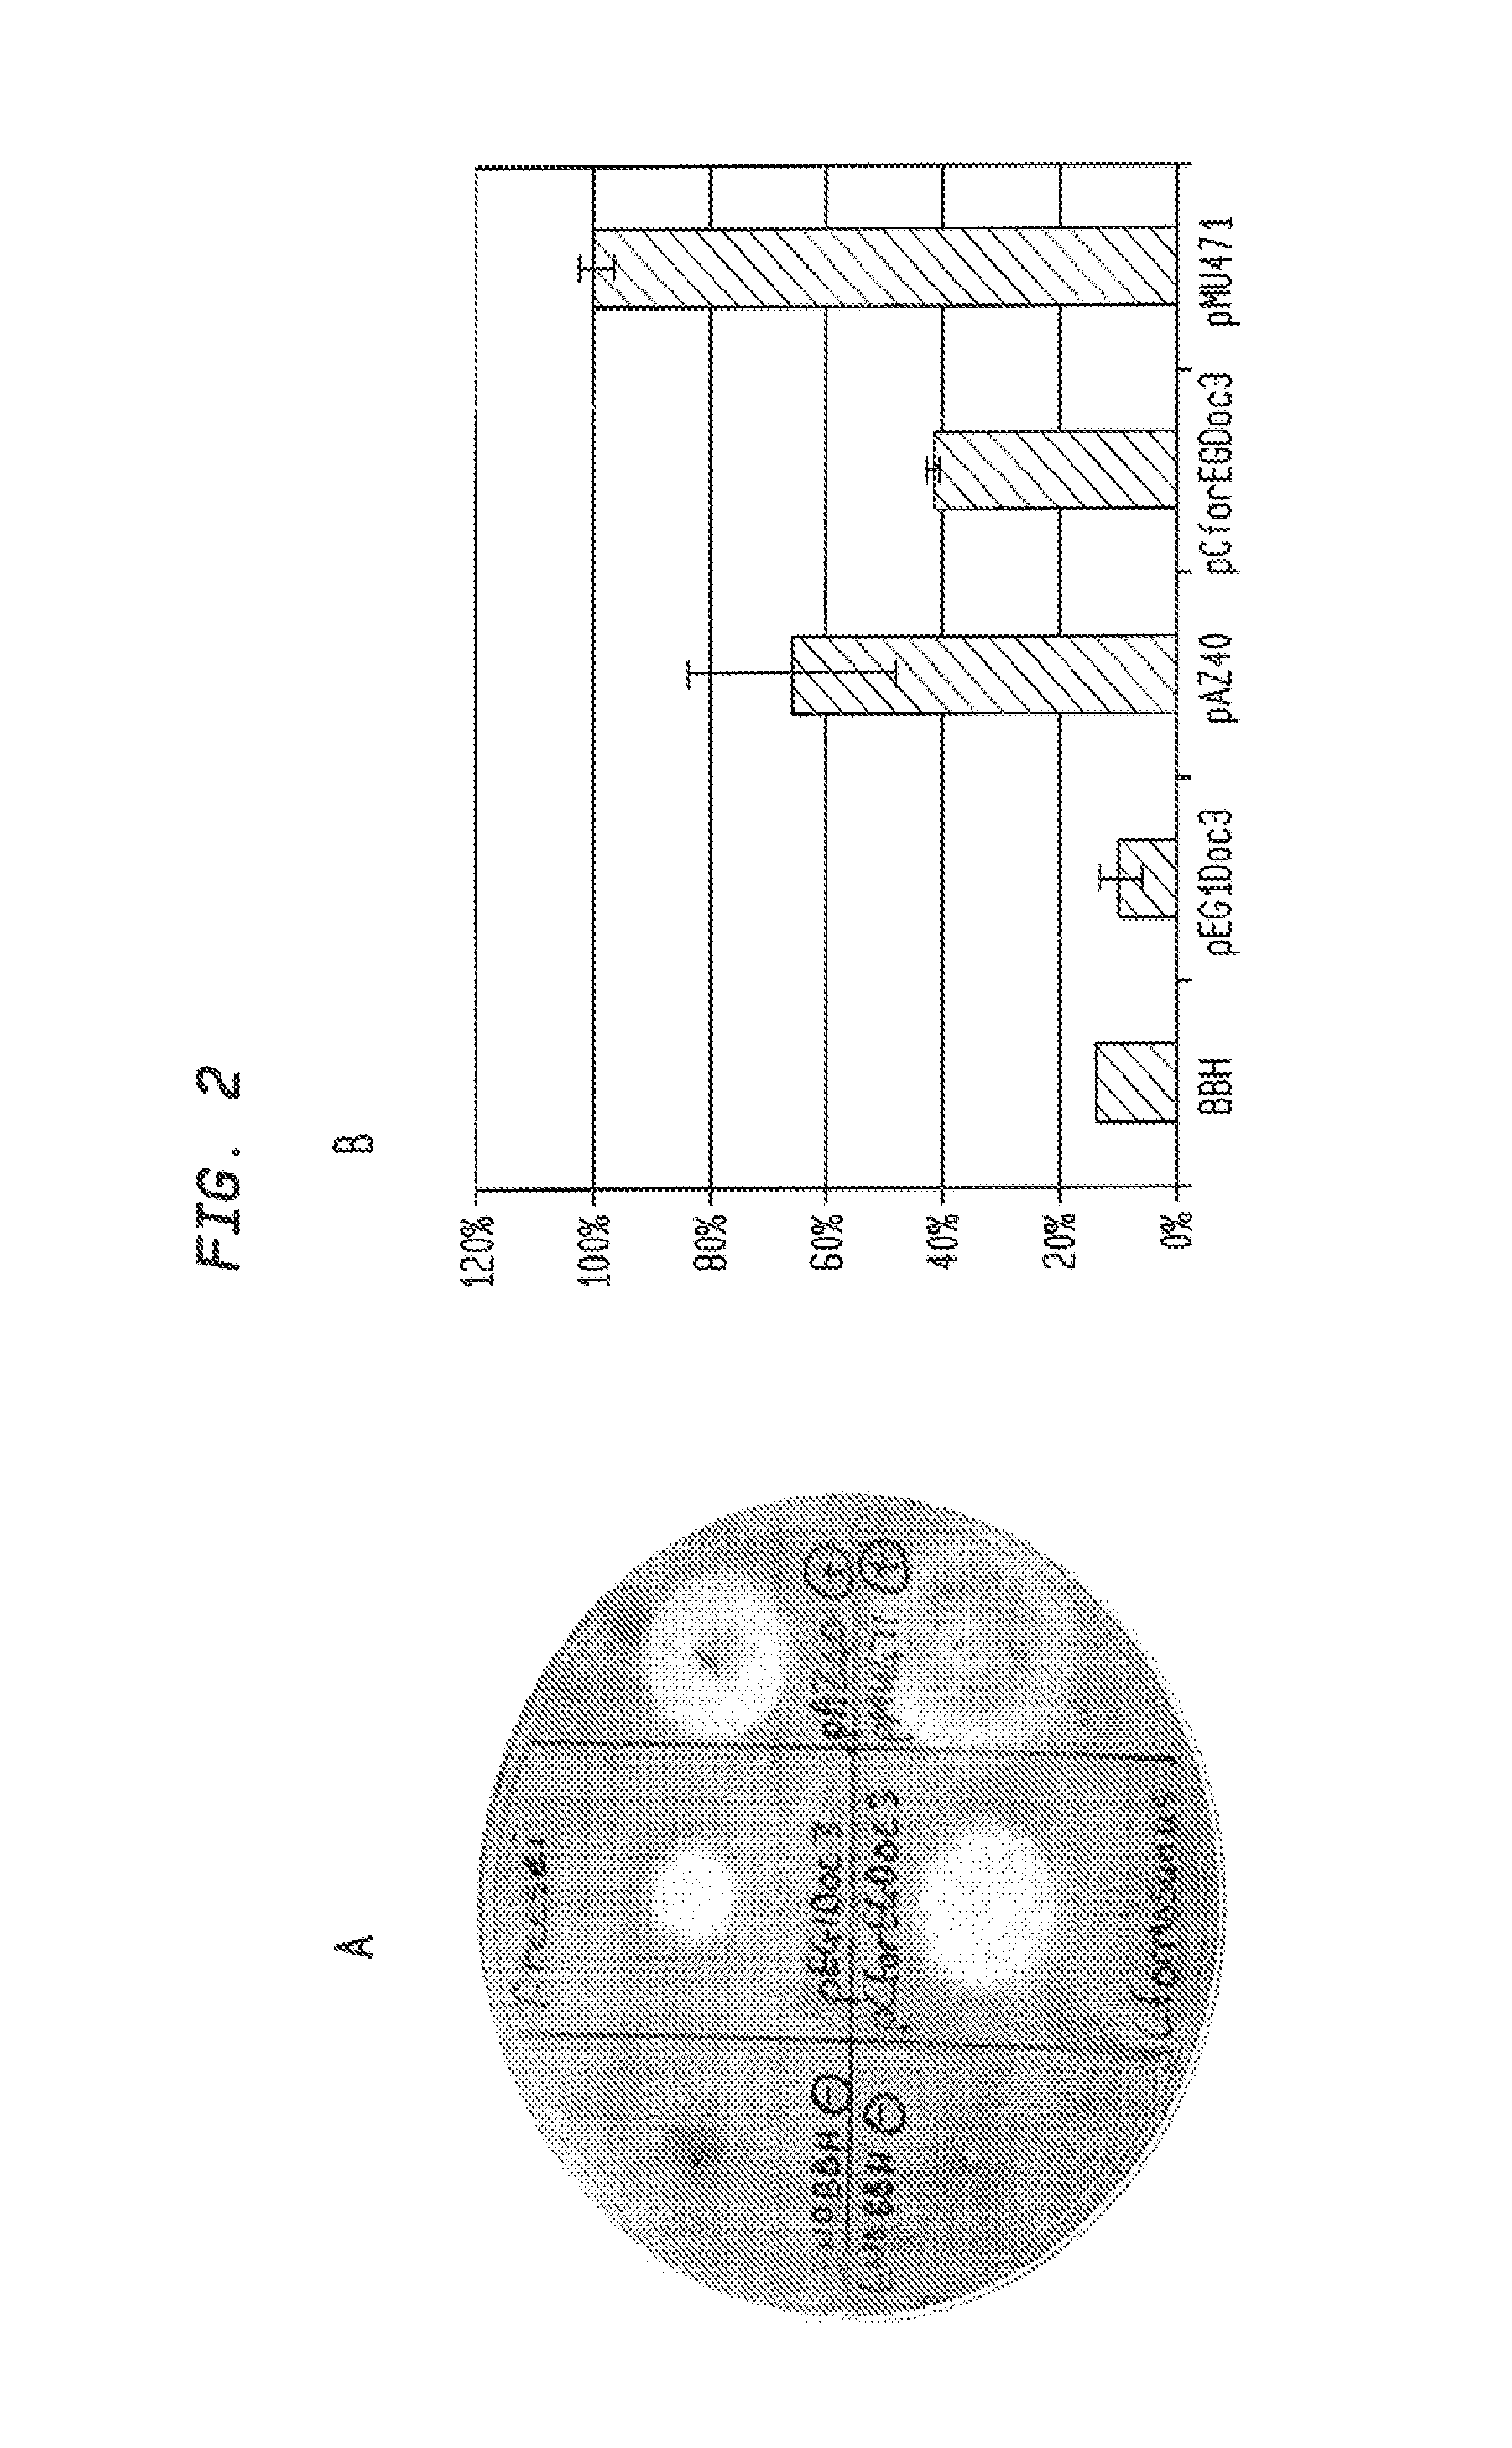 Yeast cells expressing an exogenous cellulosome and methods of using the same